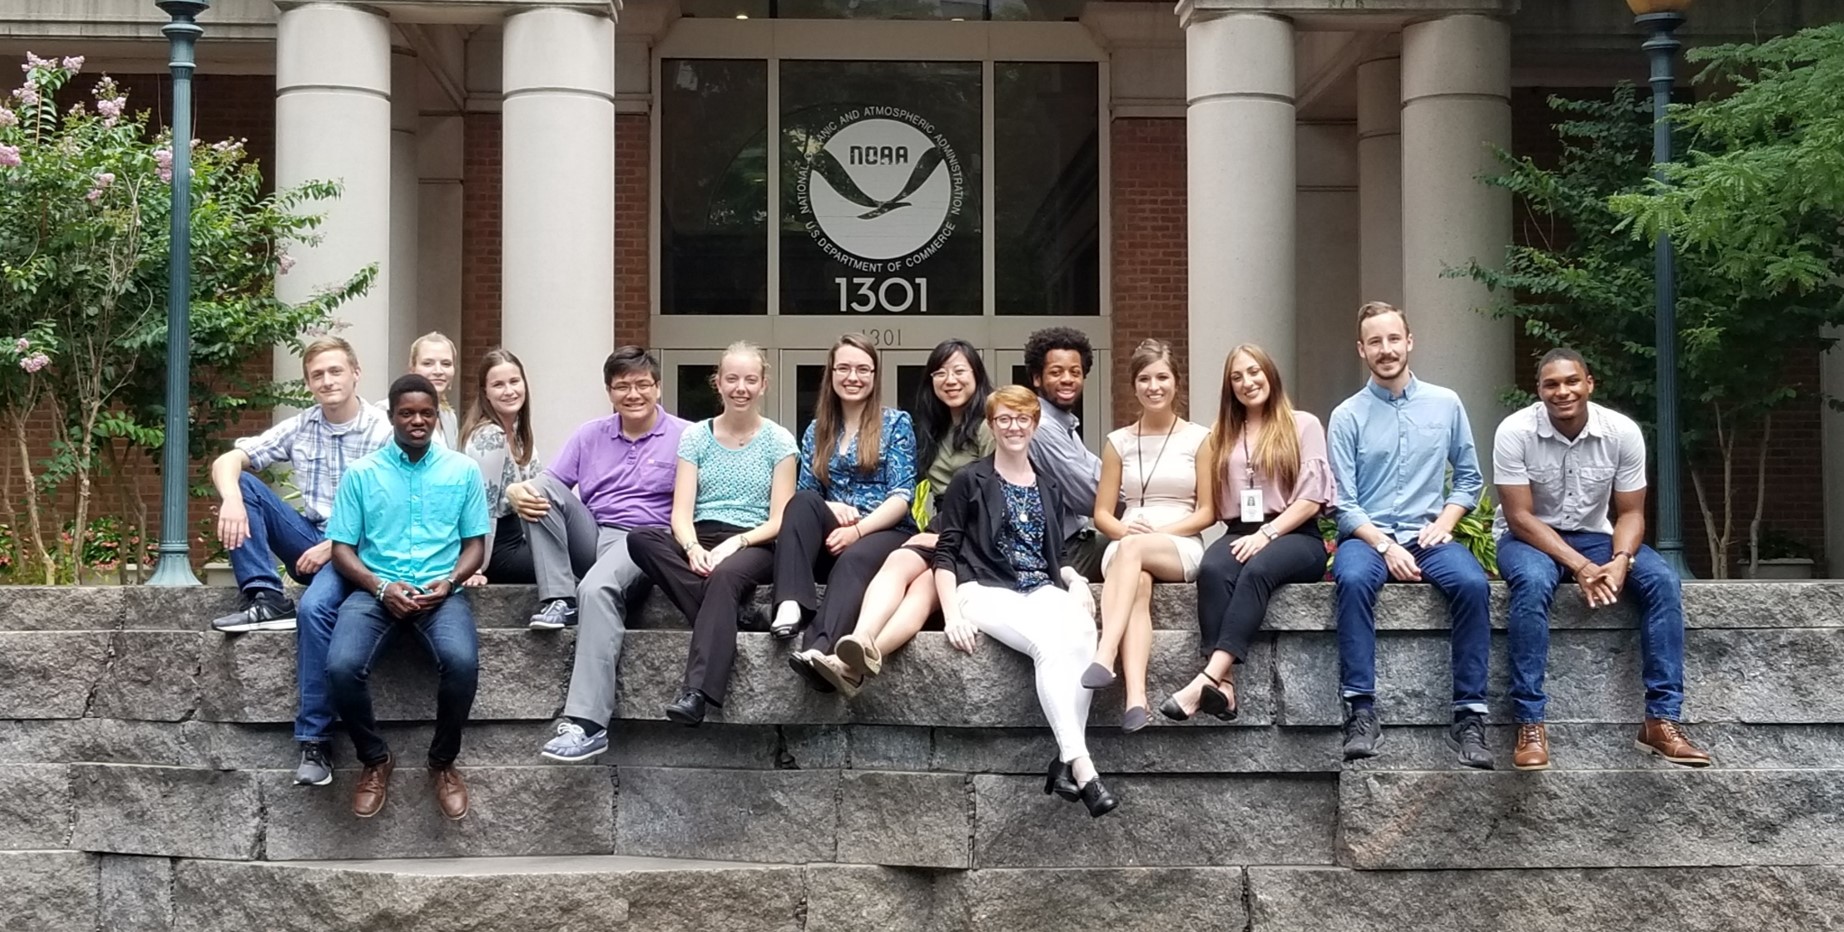 NOAA scholars at the 2018 Science & Education Symposium at NOAA Headquarters in Silver Spring, Maryland.